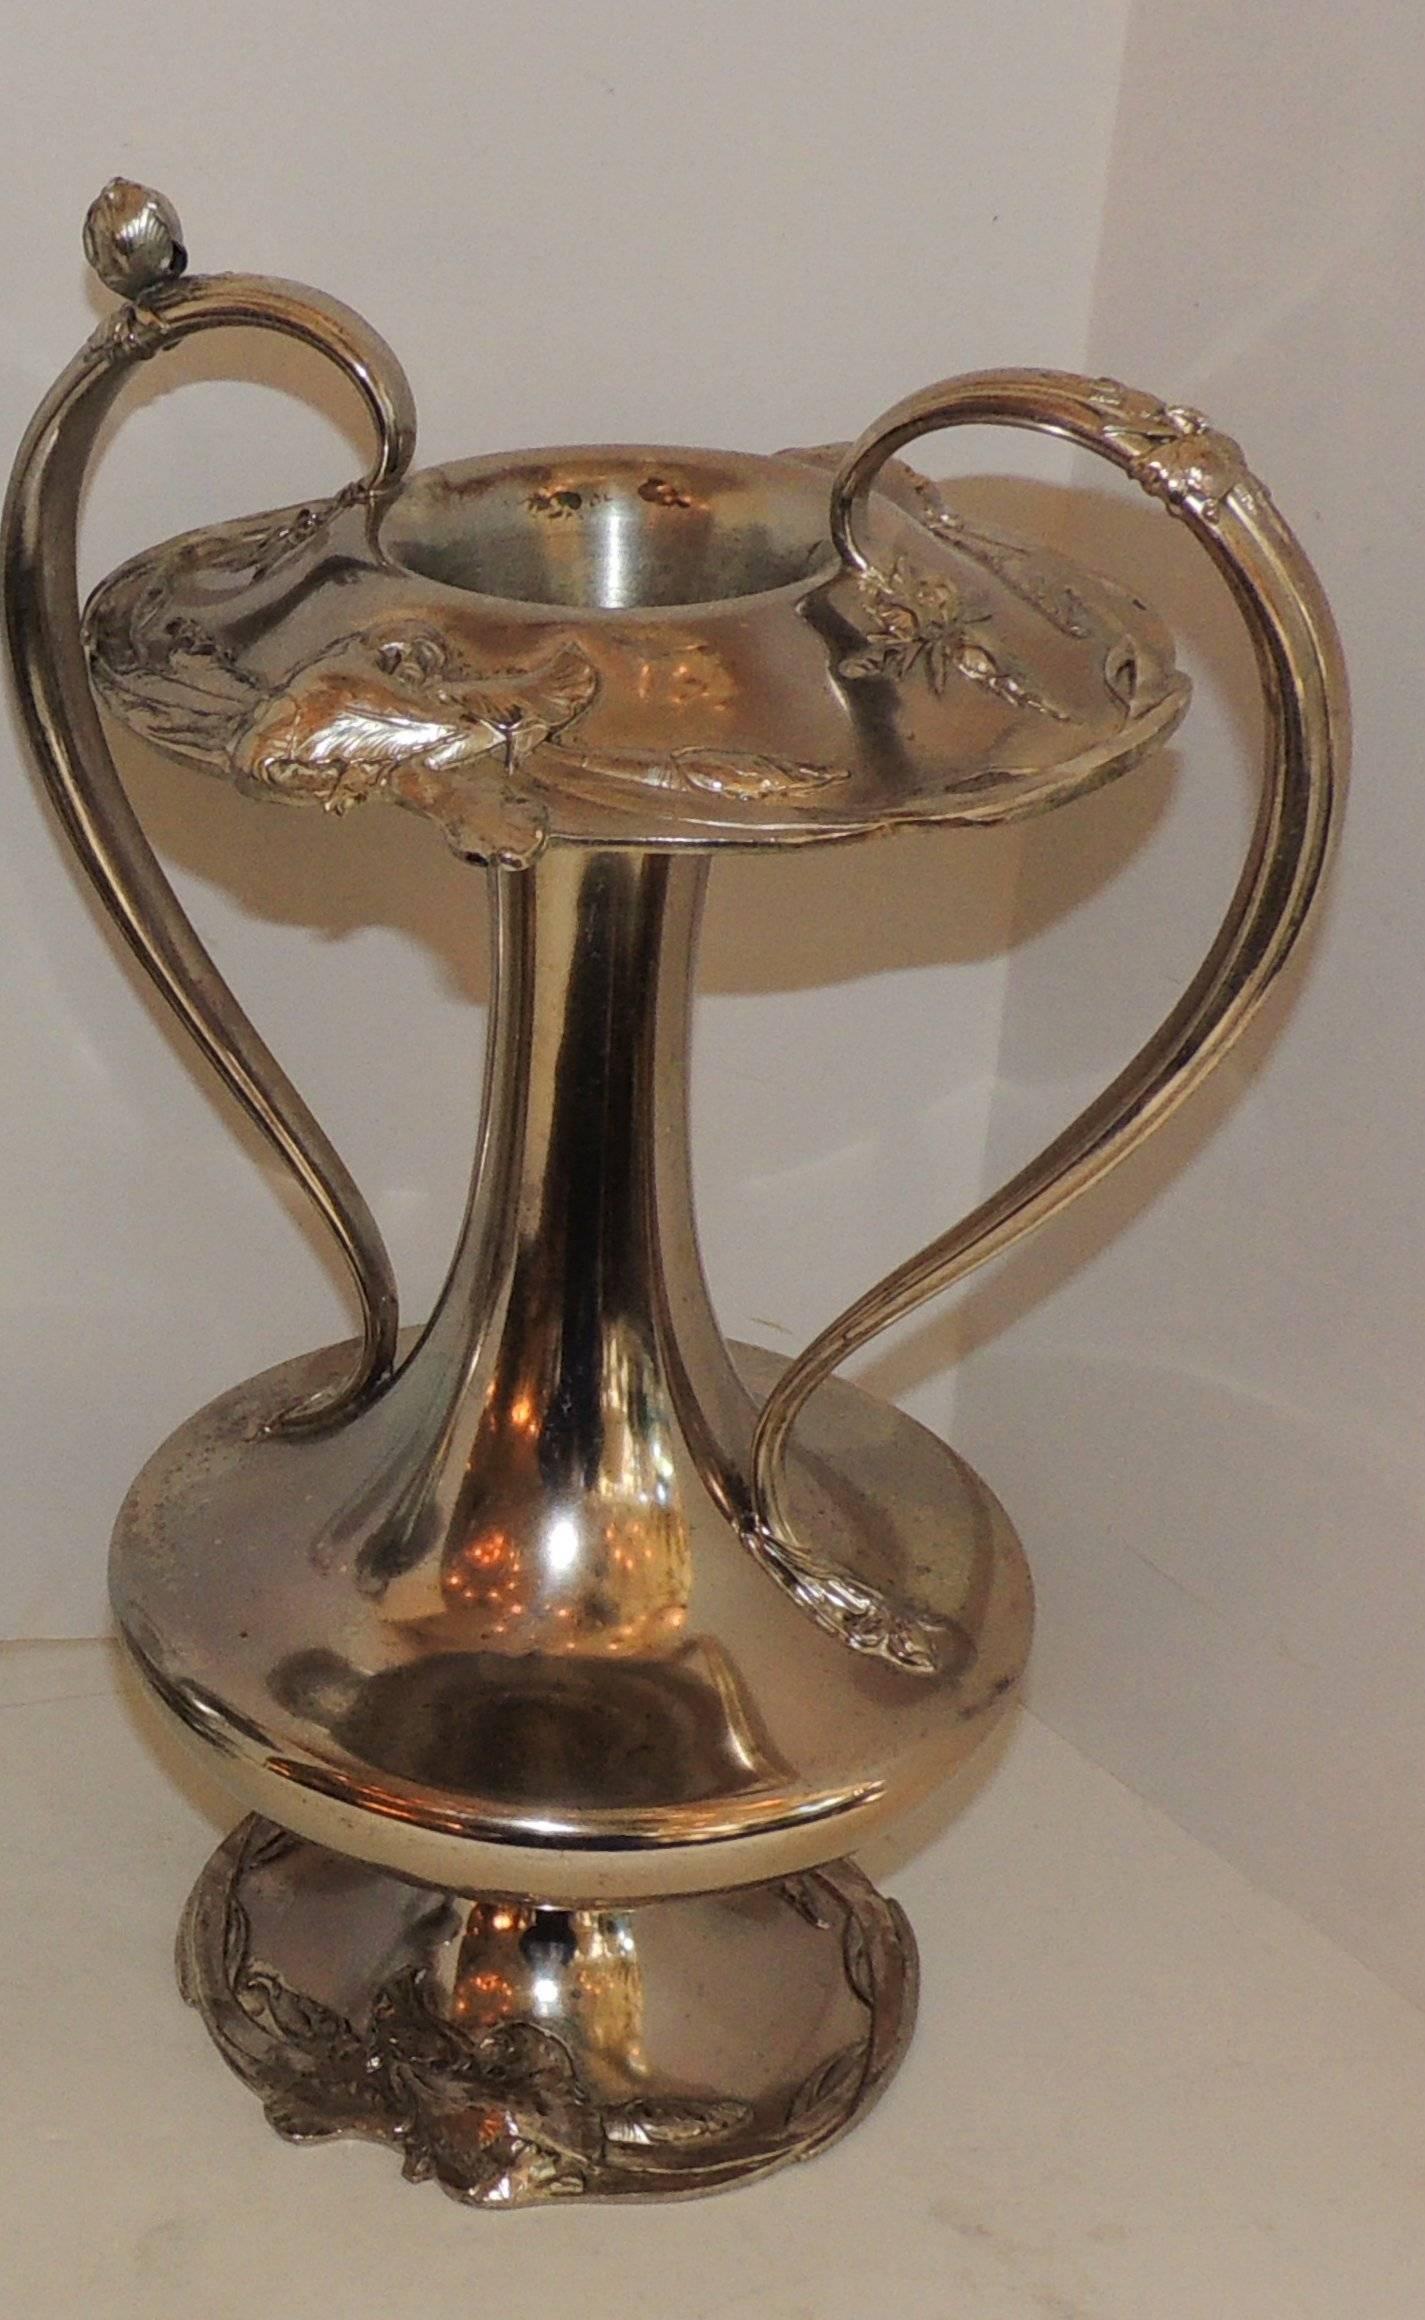 Mid-20th Century Large Pair of Reed & Barton Art Nouveau Silver Plate Urn Handle Vases WMF Urns For Sale